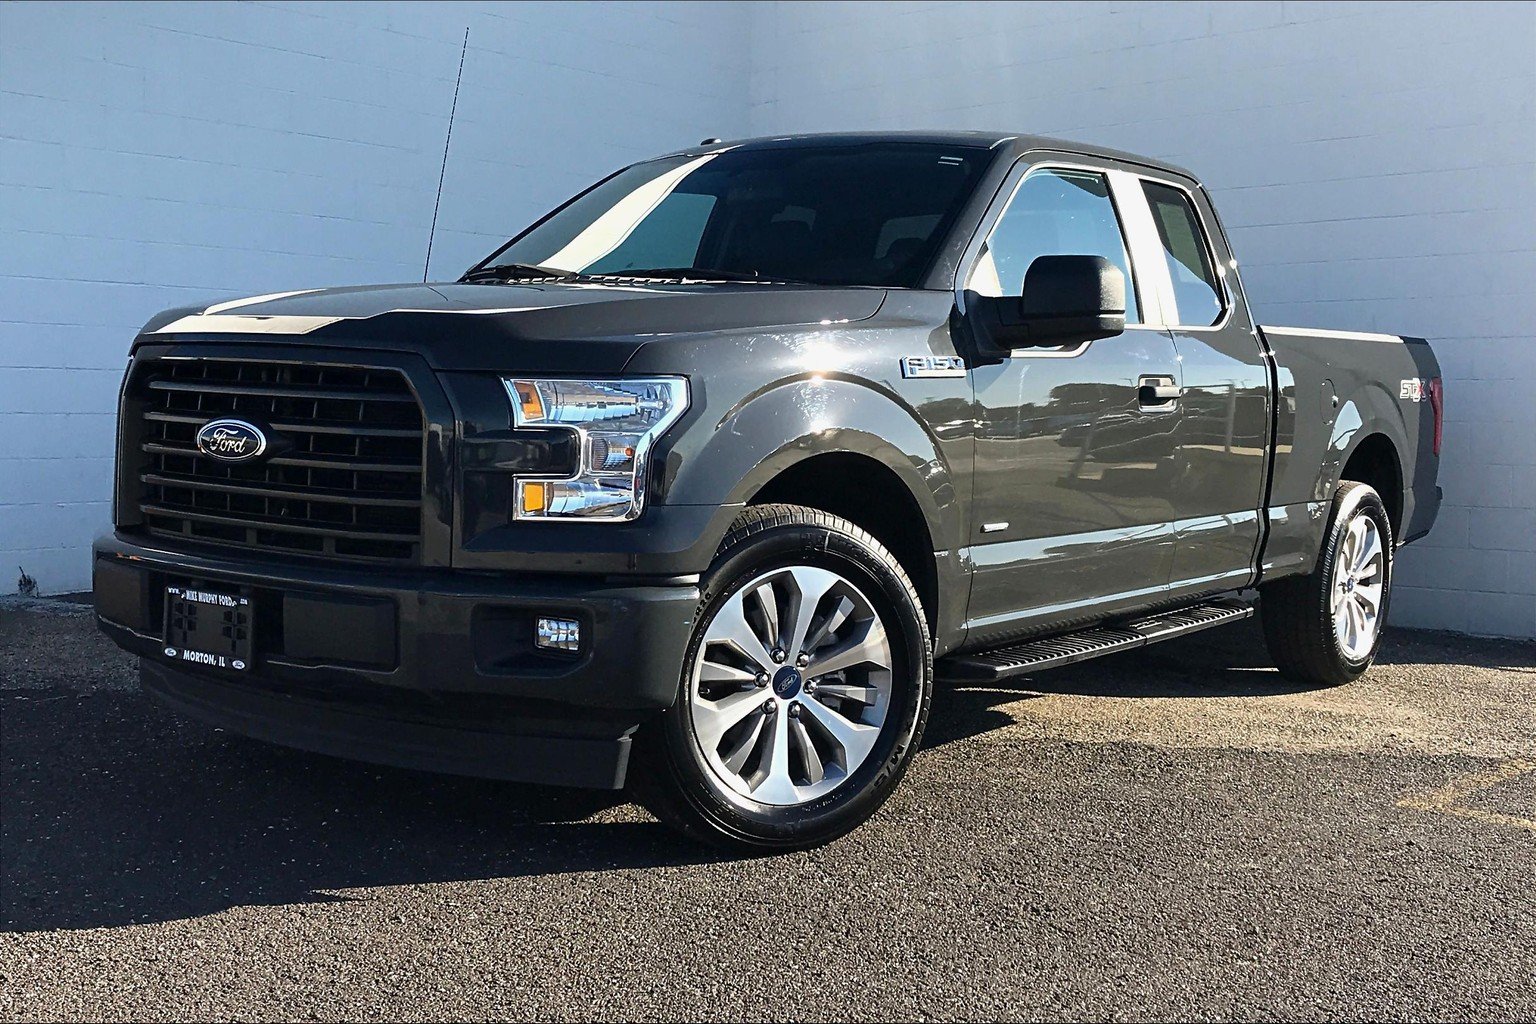 Pre-Owned 2017 Ford F-150 XL Super Cab in Morton #KC45714 | Mike Murphy